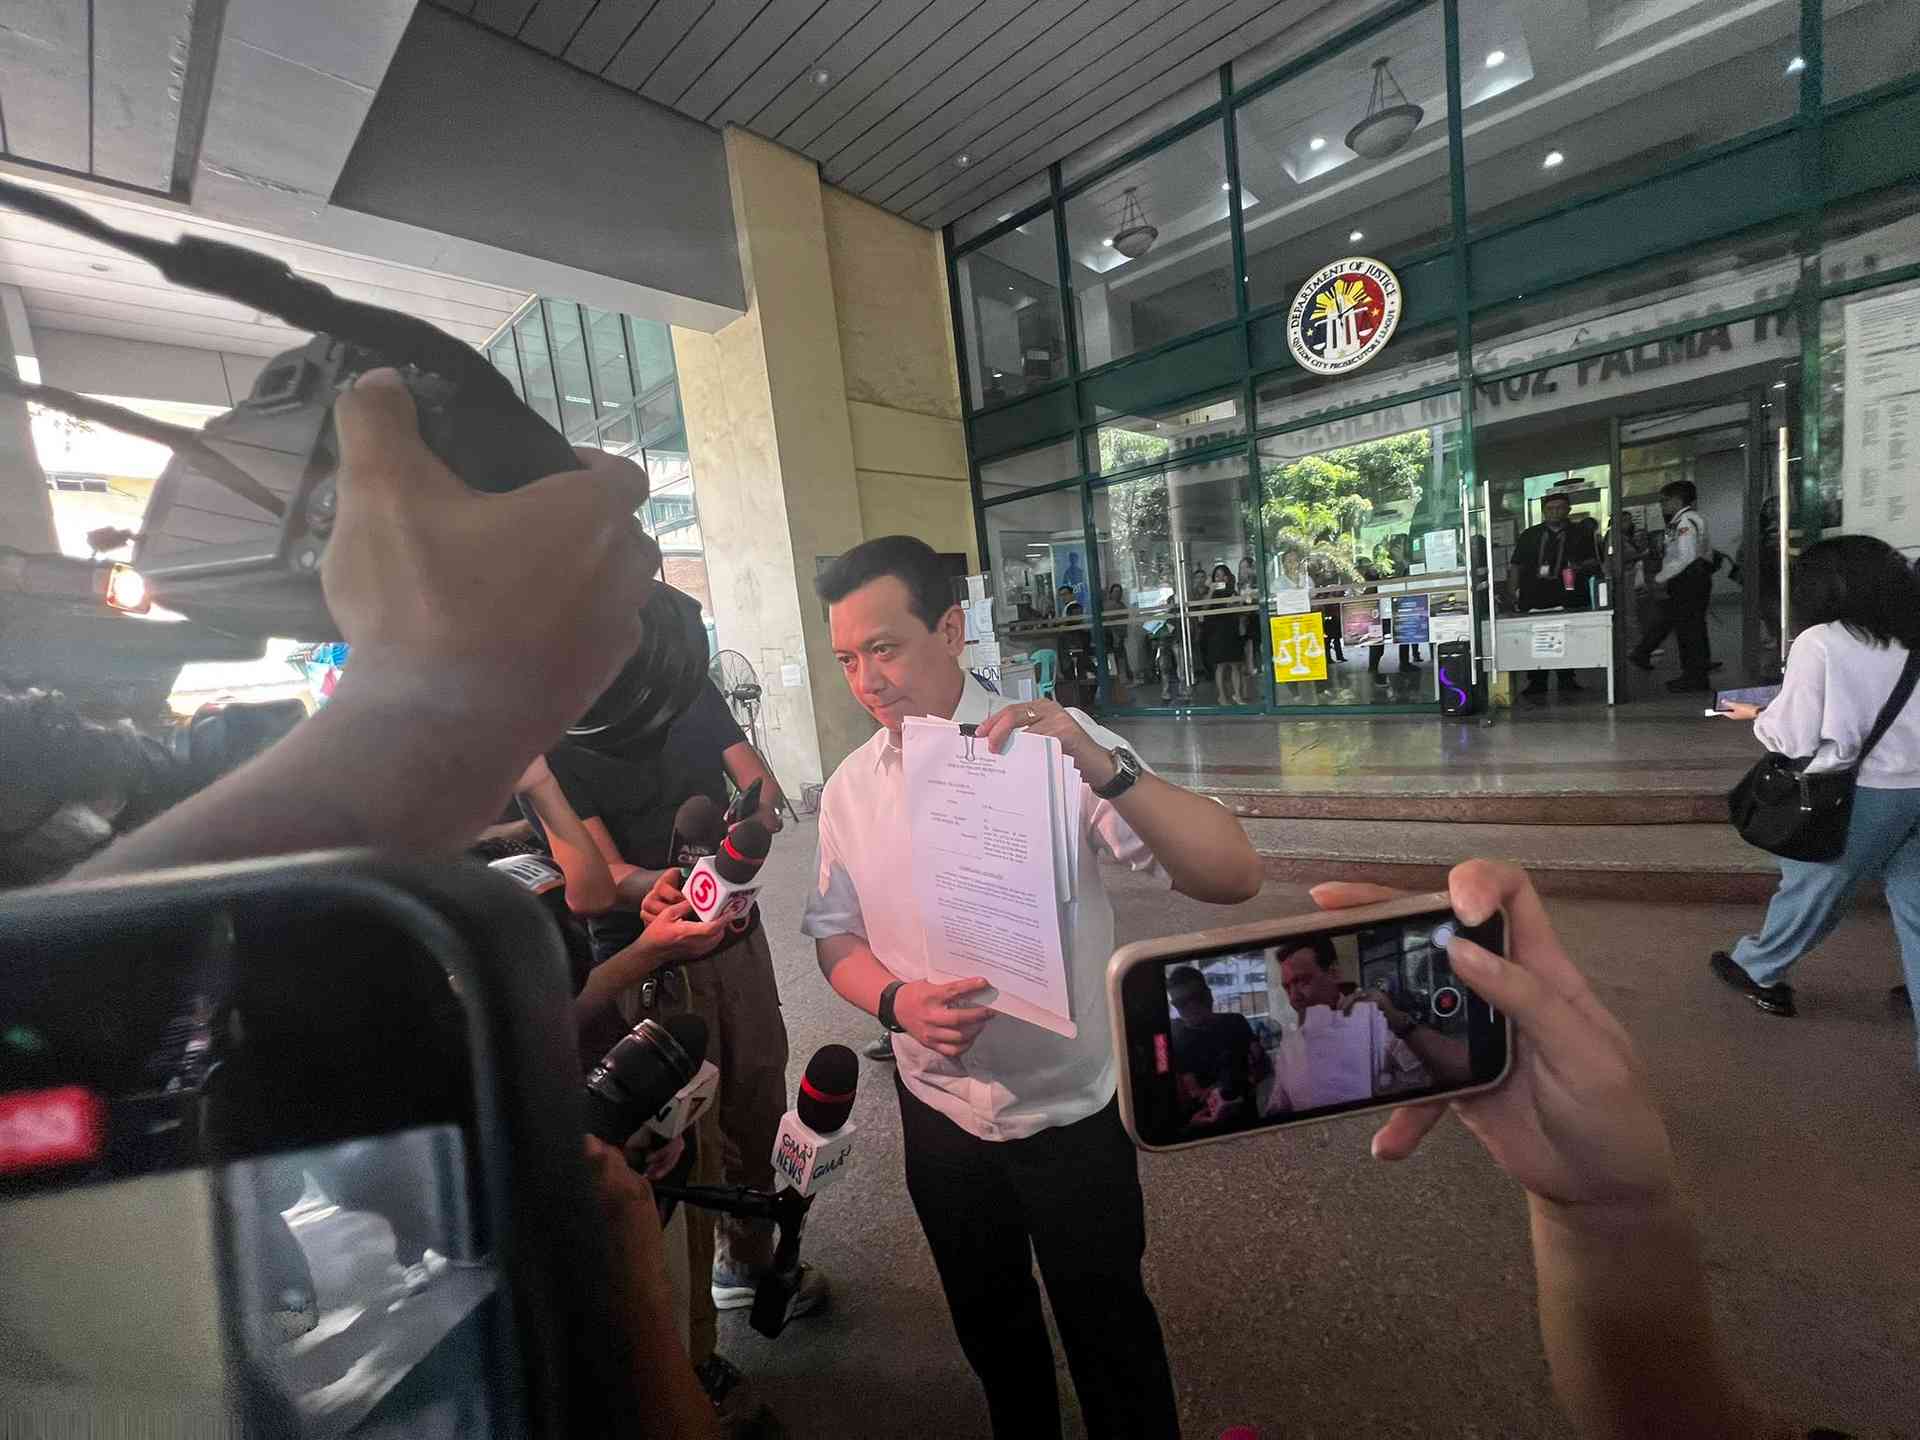 Trillanes files libel charges vs. Harry Roque, SMNI hosts, others